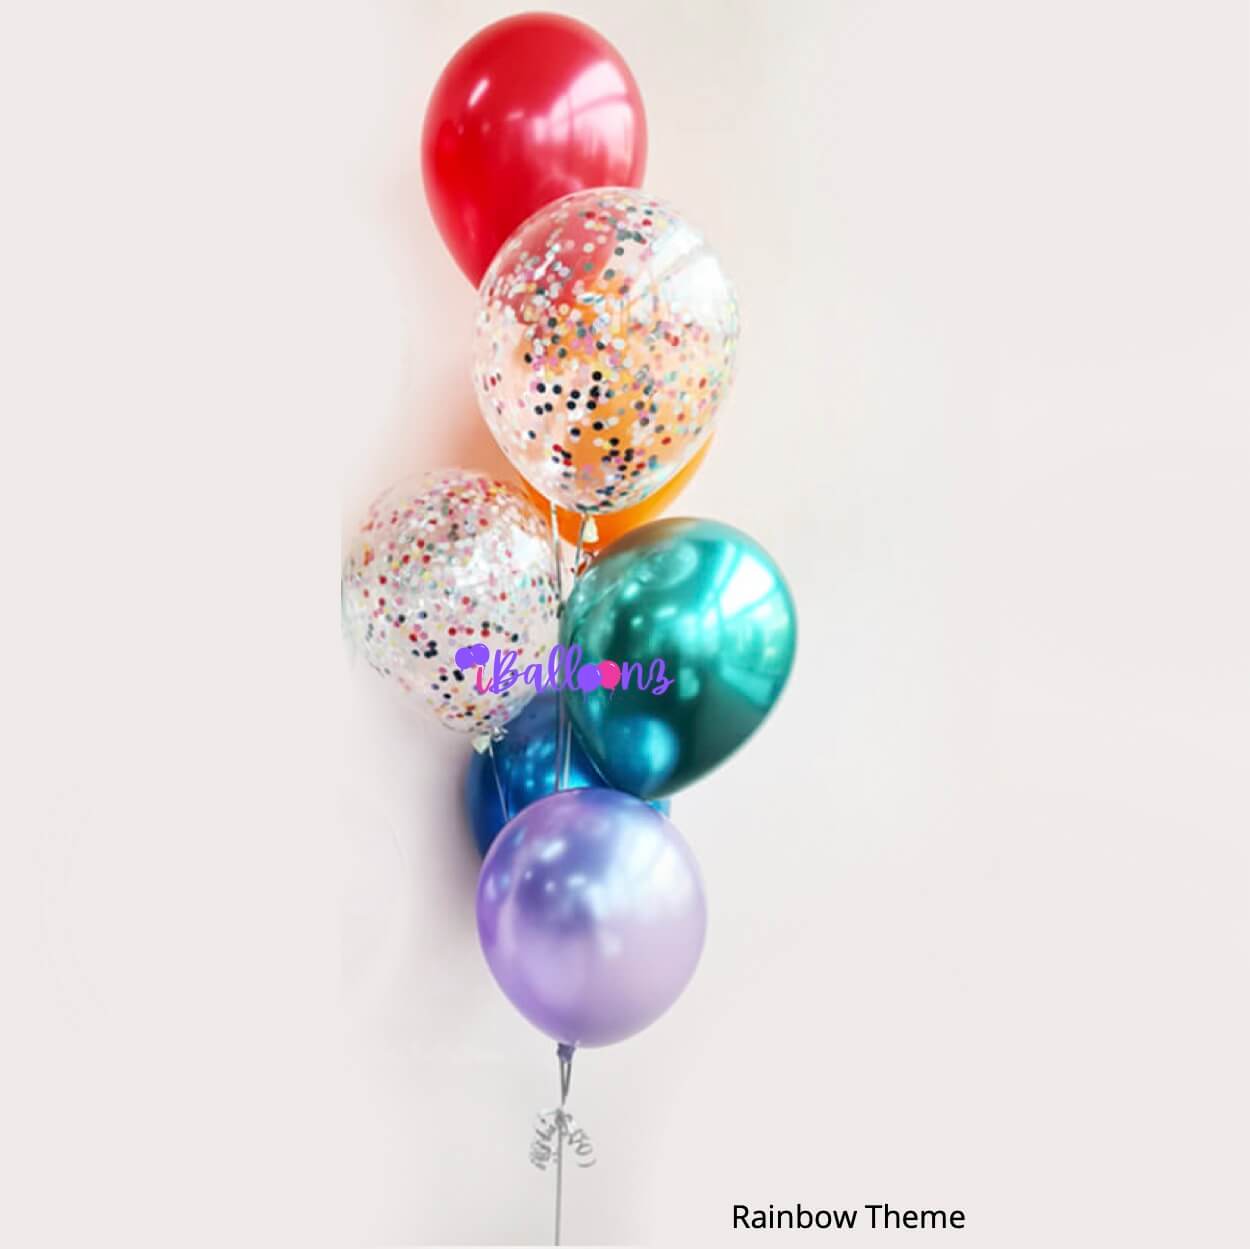 Awesome Balloon Bouquet | Shop Online Now - 24/7 - Sale | iBalloonz.com ...